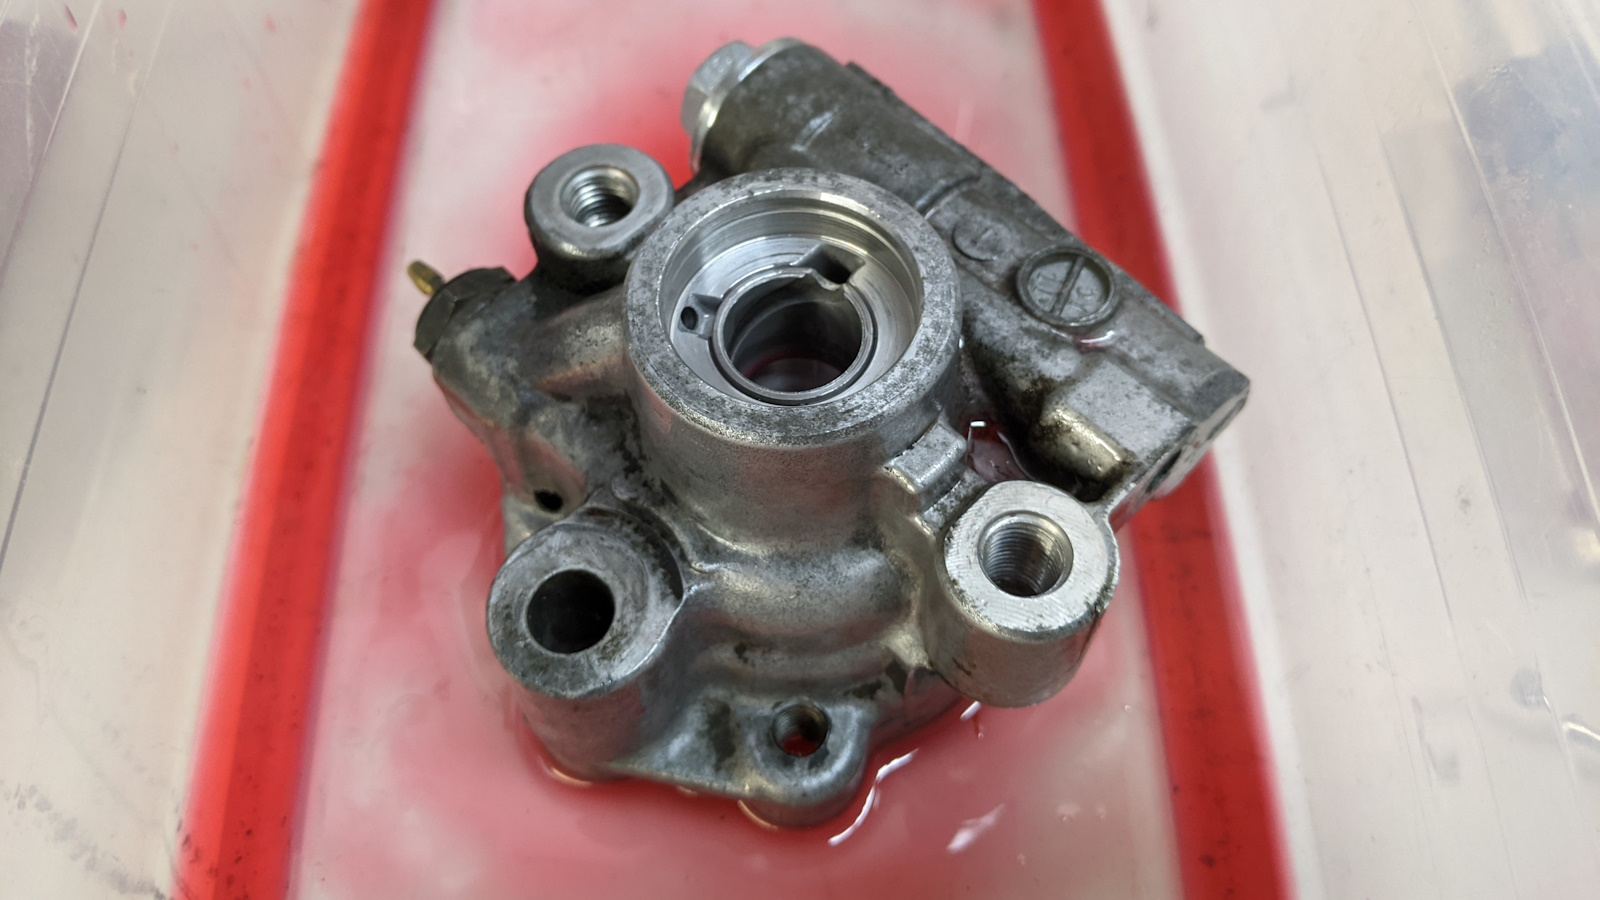 Seal removed from the input shaft side of the power steering pump